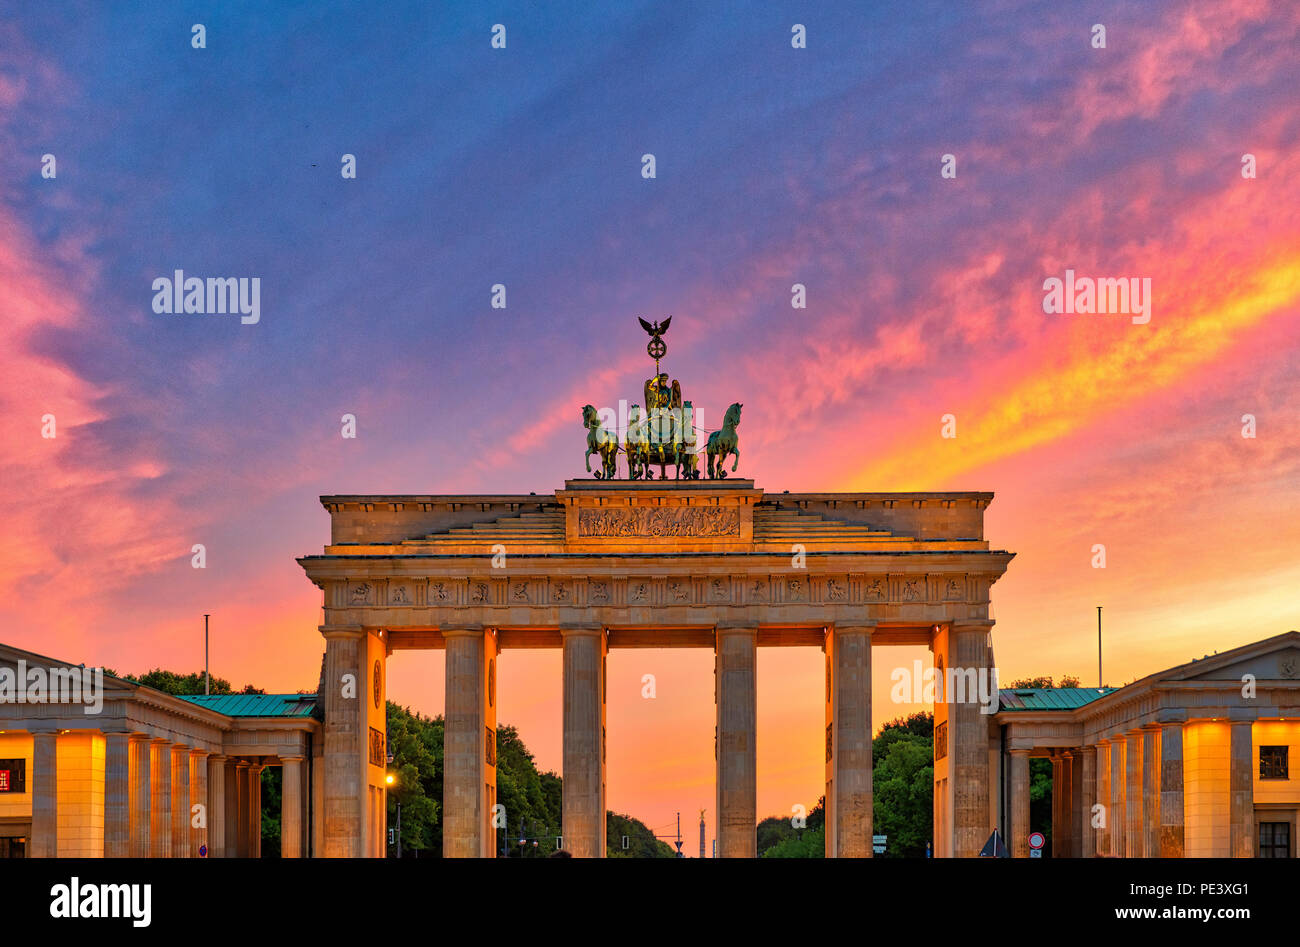 Stunning view of the Brandenburg Gate in Berlin at dusk, with colorful twilight in background, Berlin, Germany Stock Photo